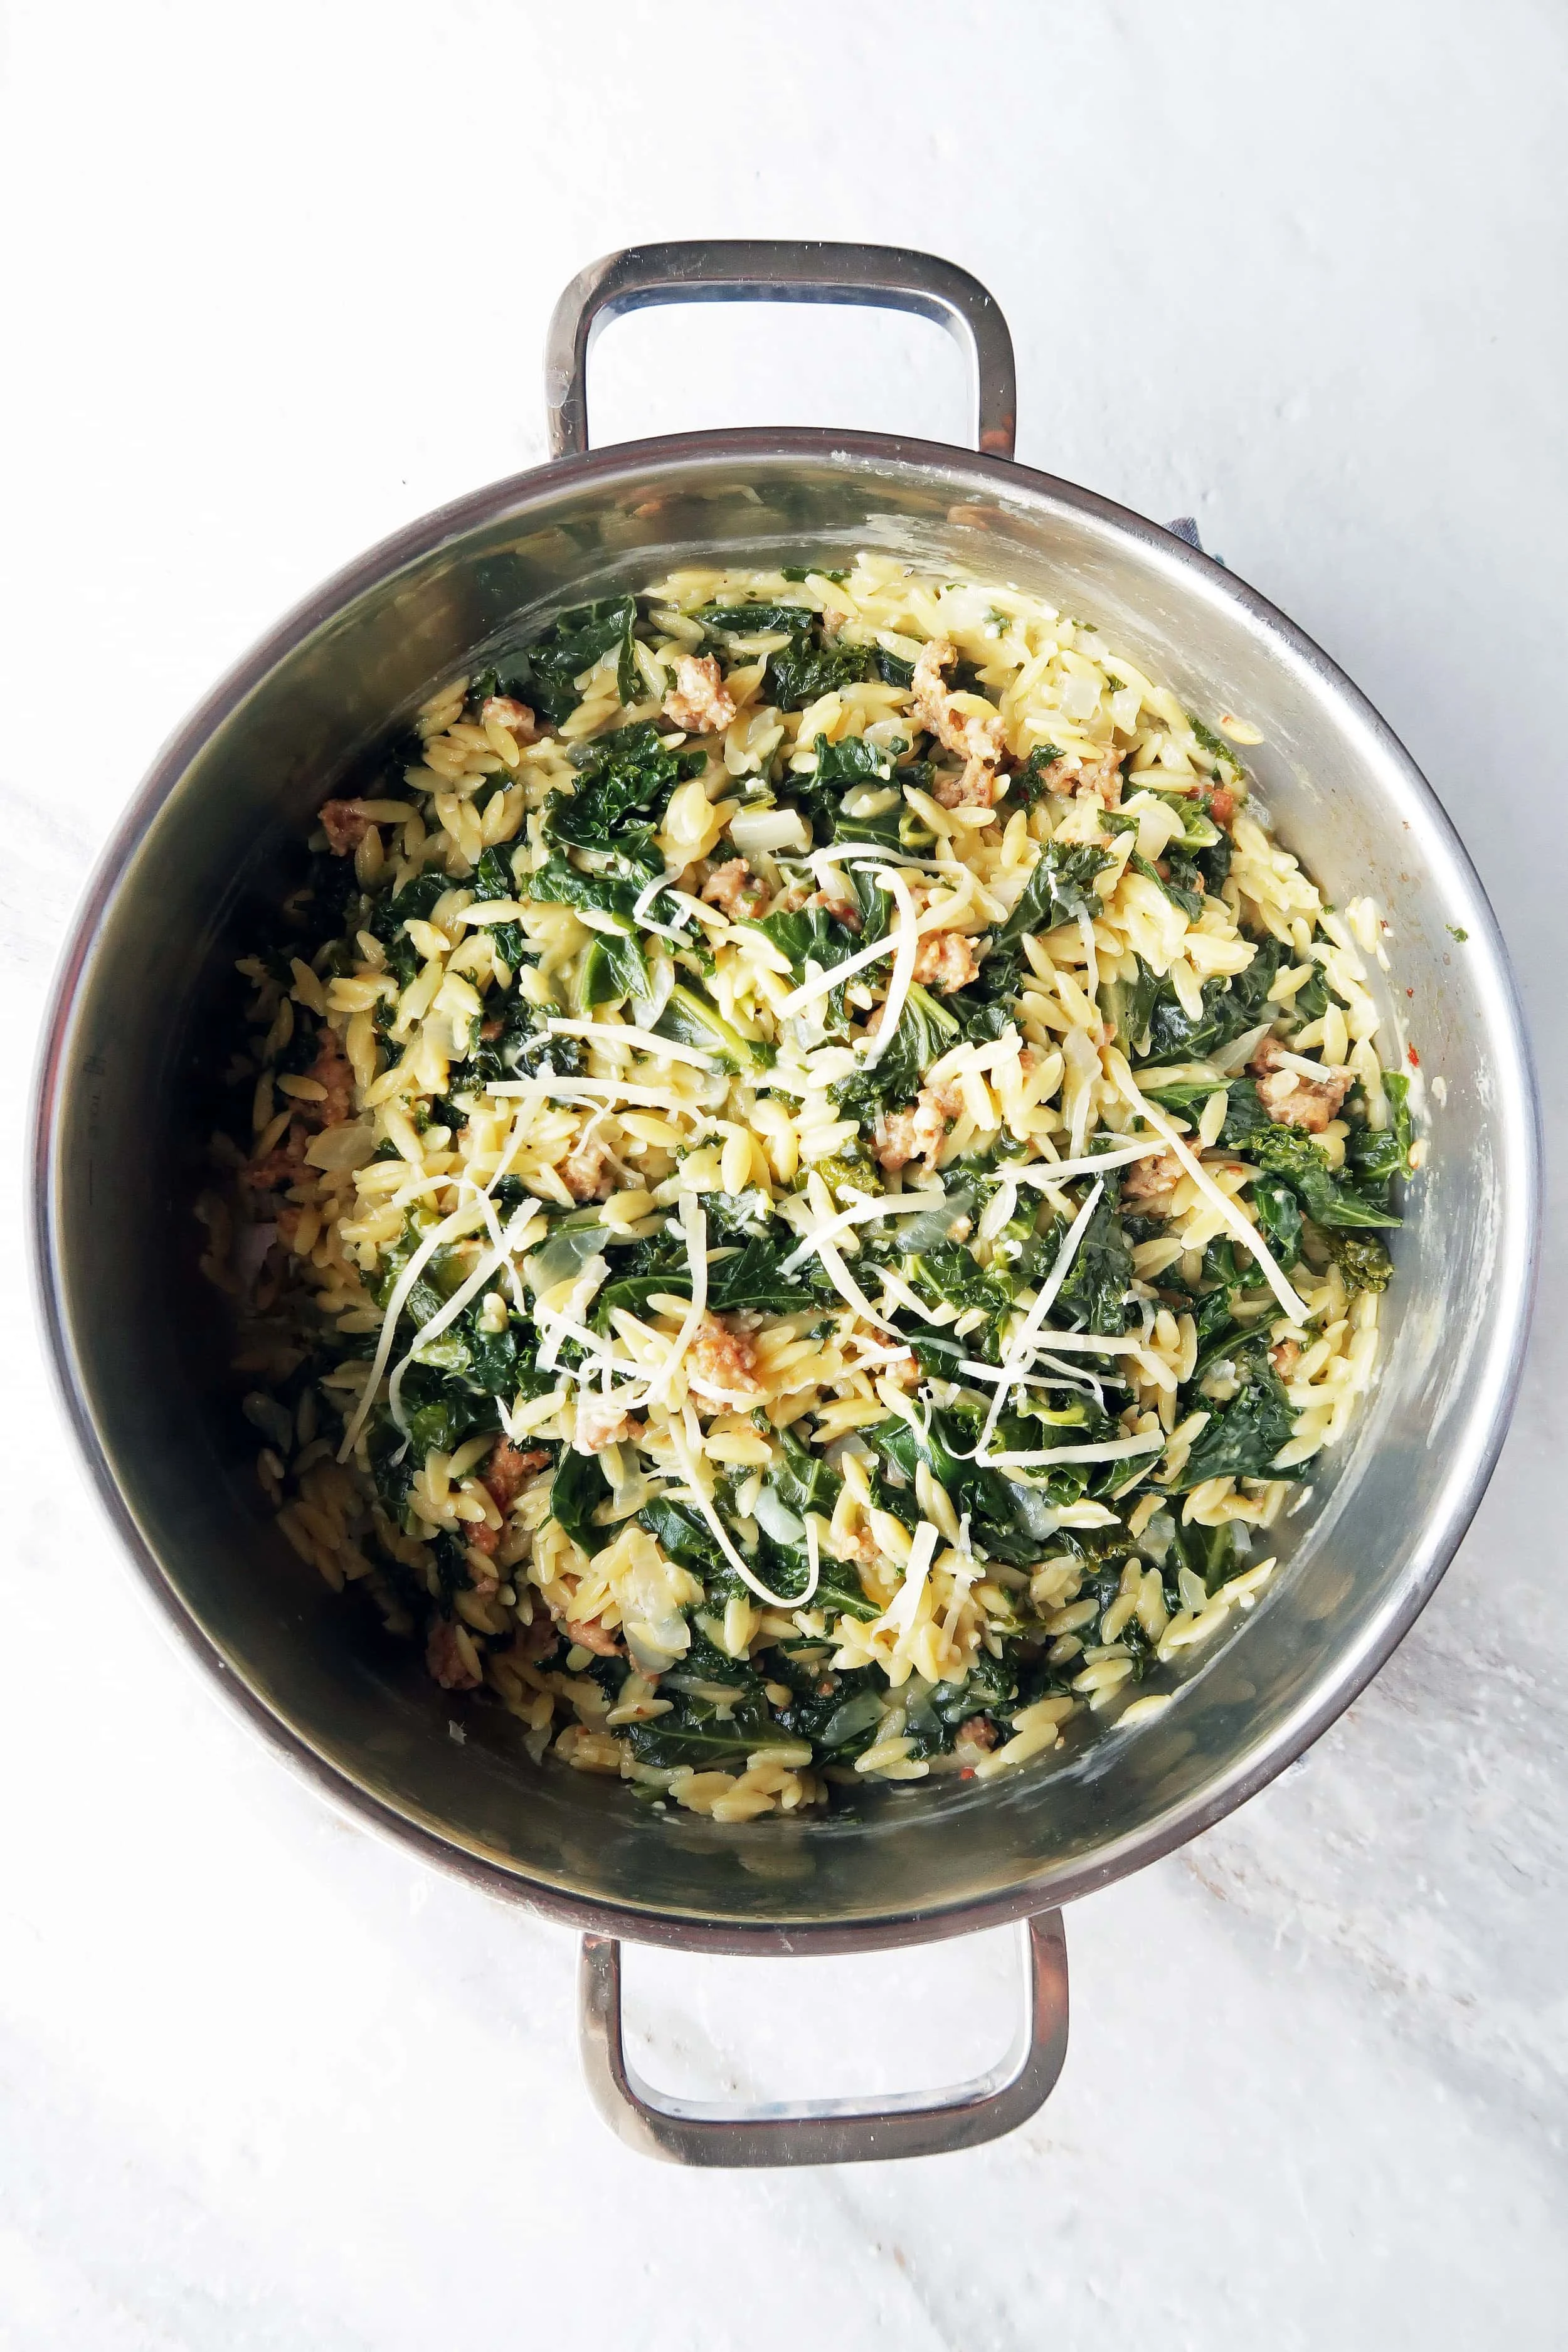 Orzo pasta with Italian sausage and kale with shredded cheese on top in a metal pot.